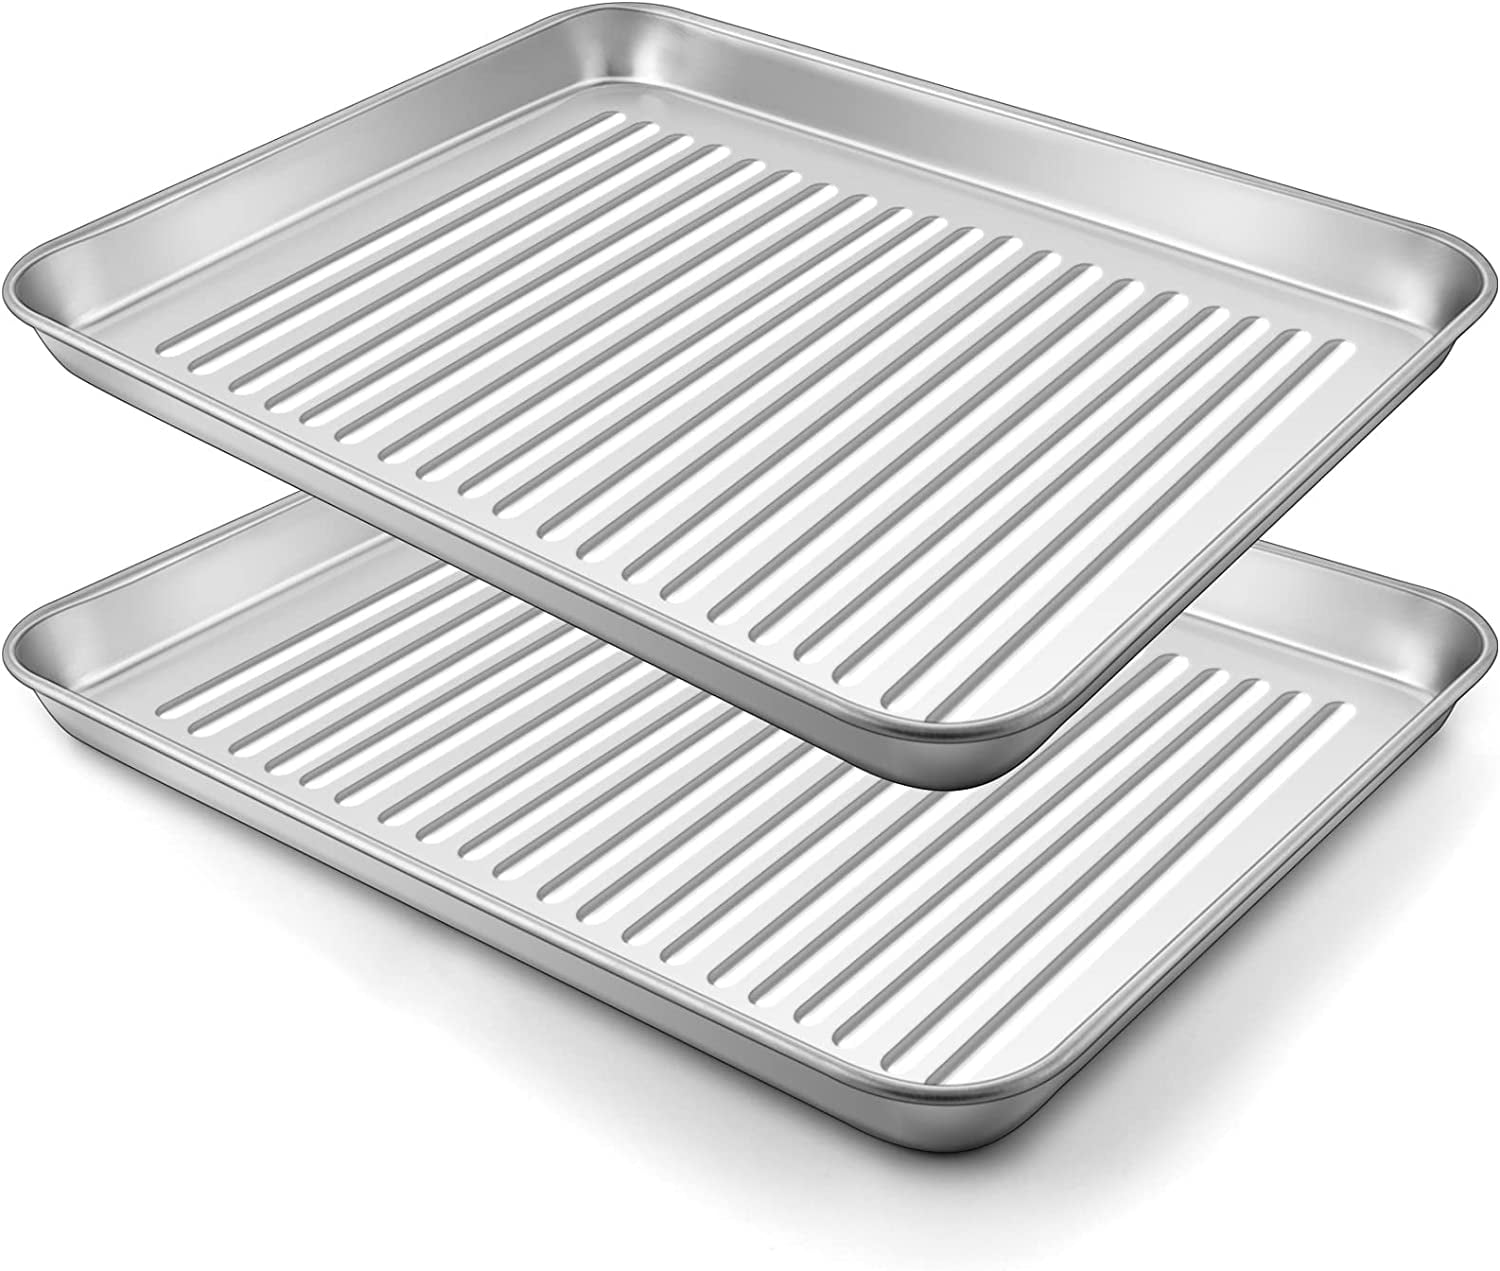 T-Fal AirBake 9 In. x 13 In. Oblong Baking Dish with Cover